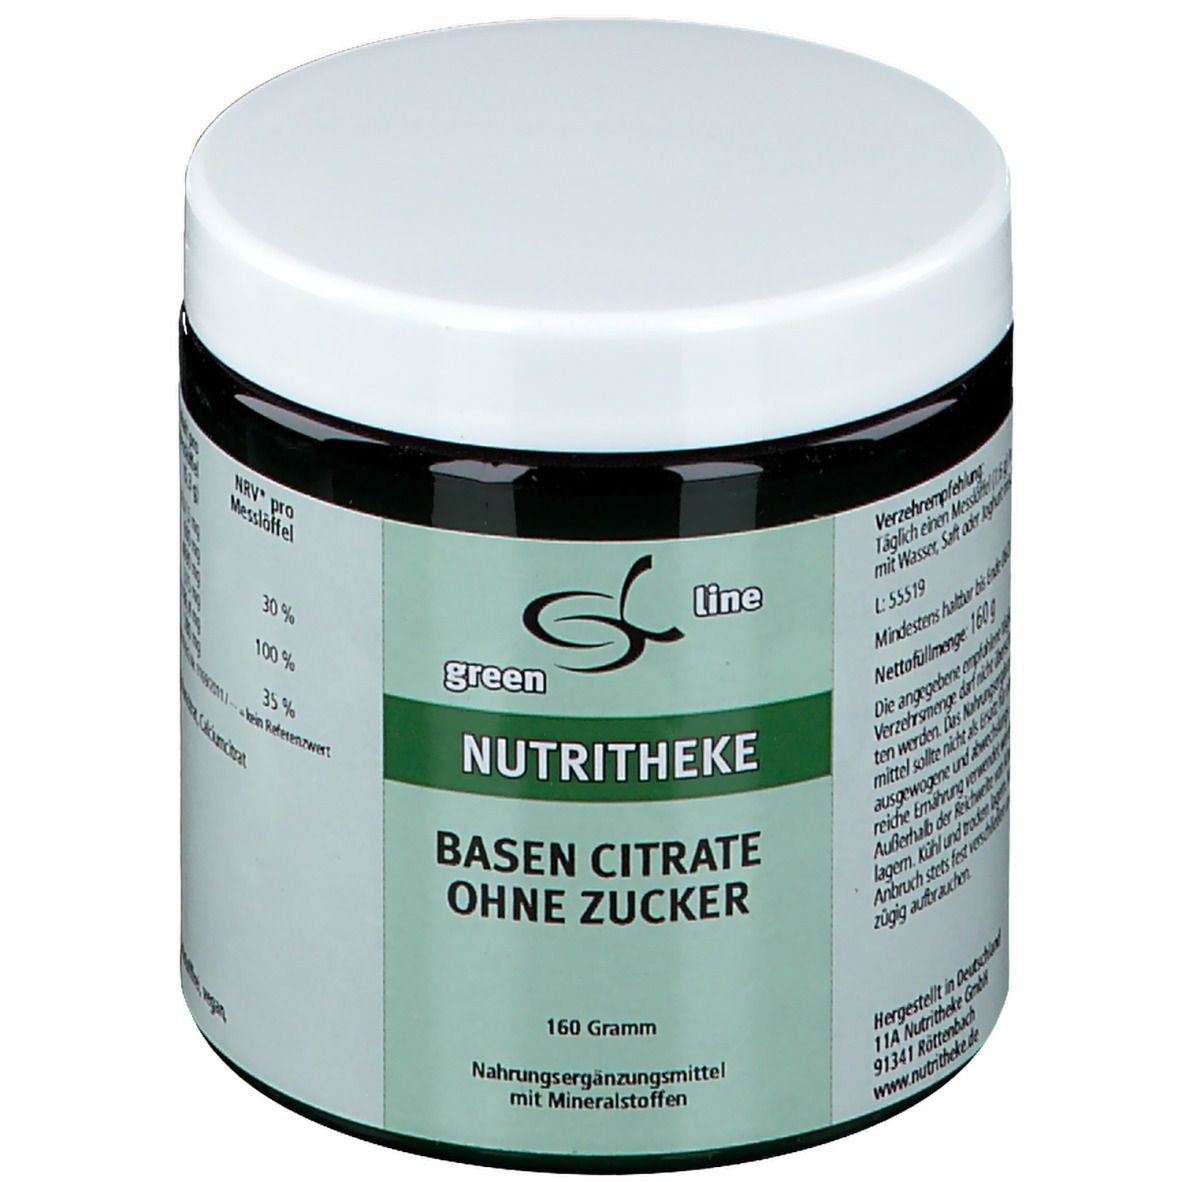 Image of green line Basencitrate ohne Zucker